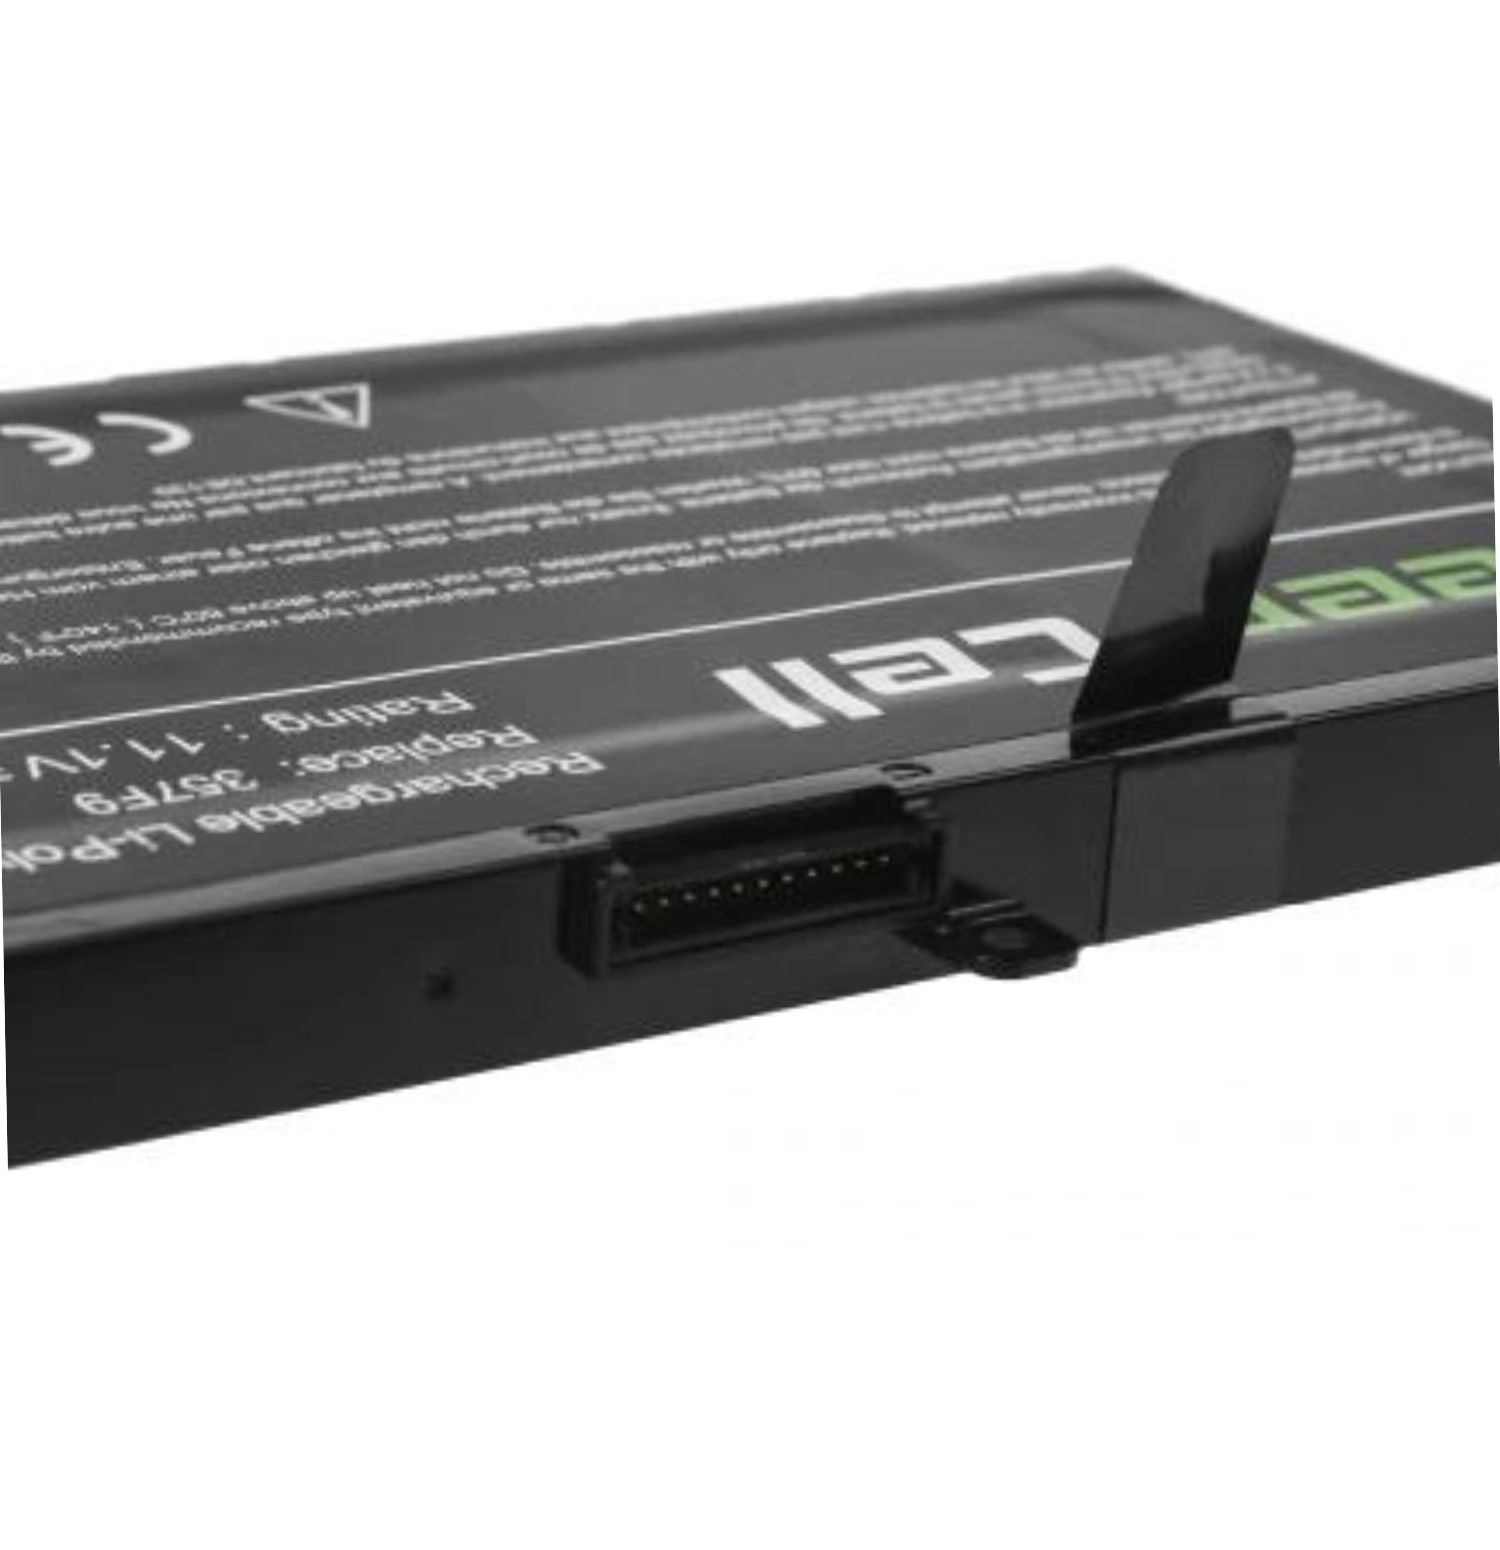 Dell 071JF4  Laptop Battery for latitude  15 7566 7567 7557 5576 5577 71JF4 357F9 Series Laptop.s